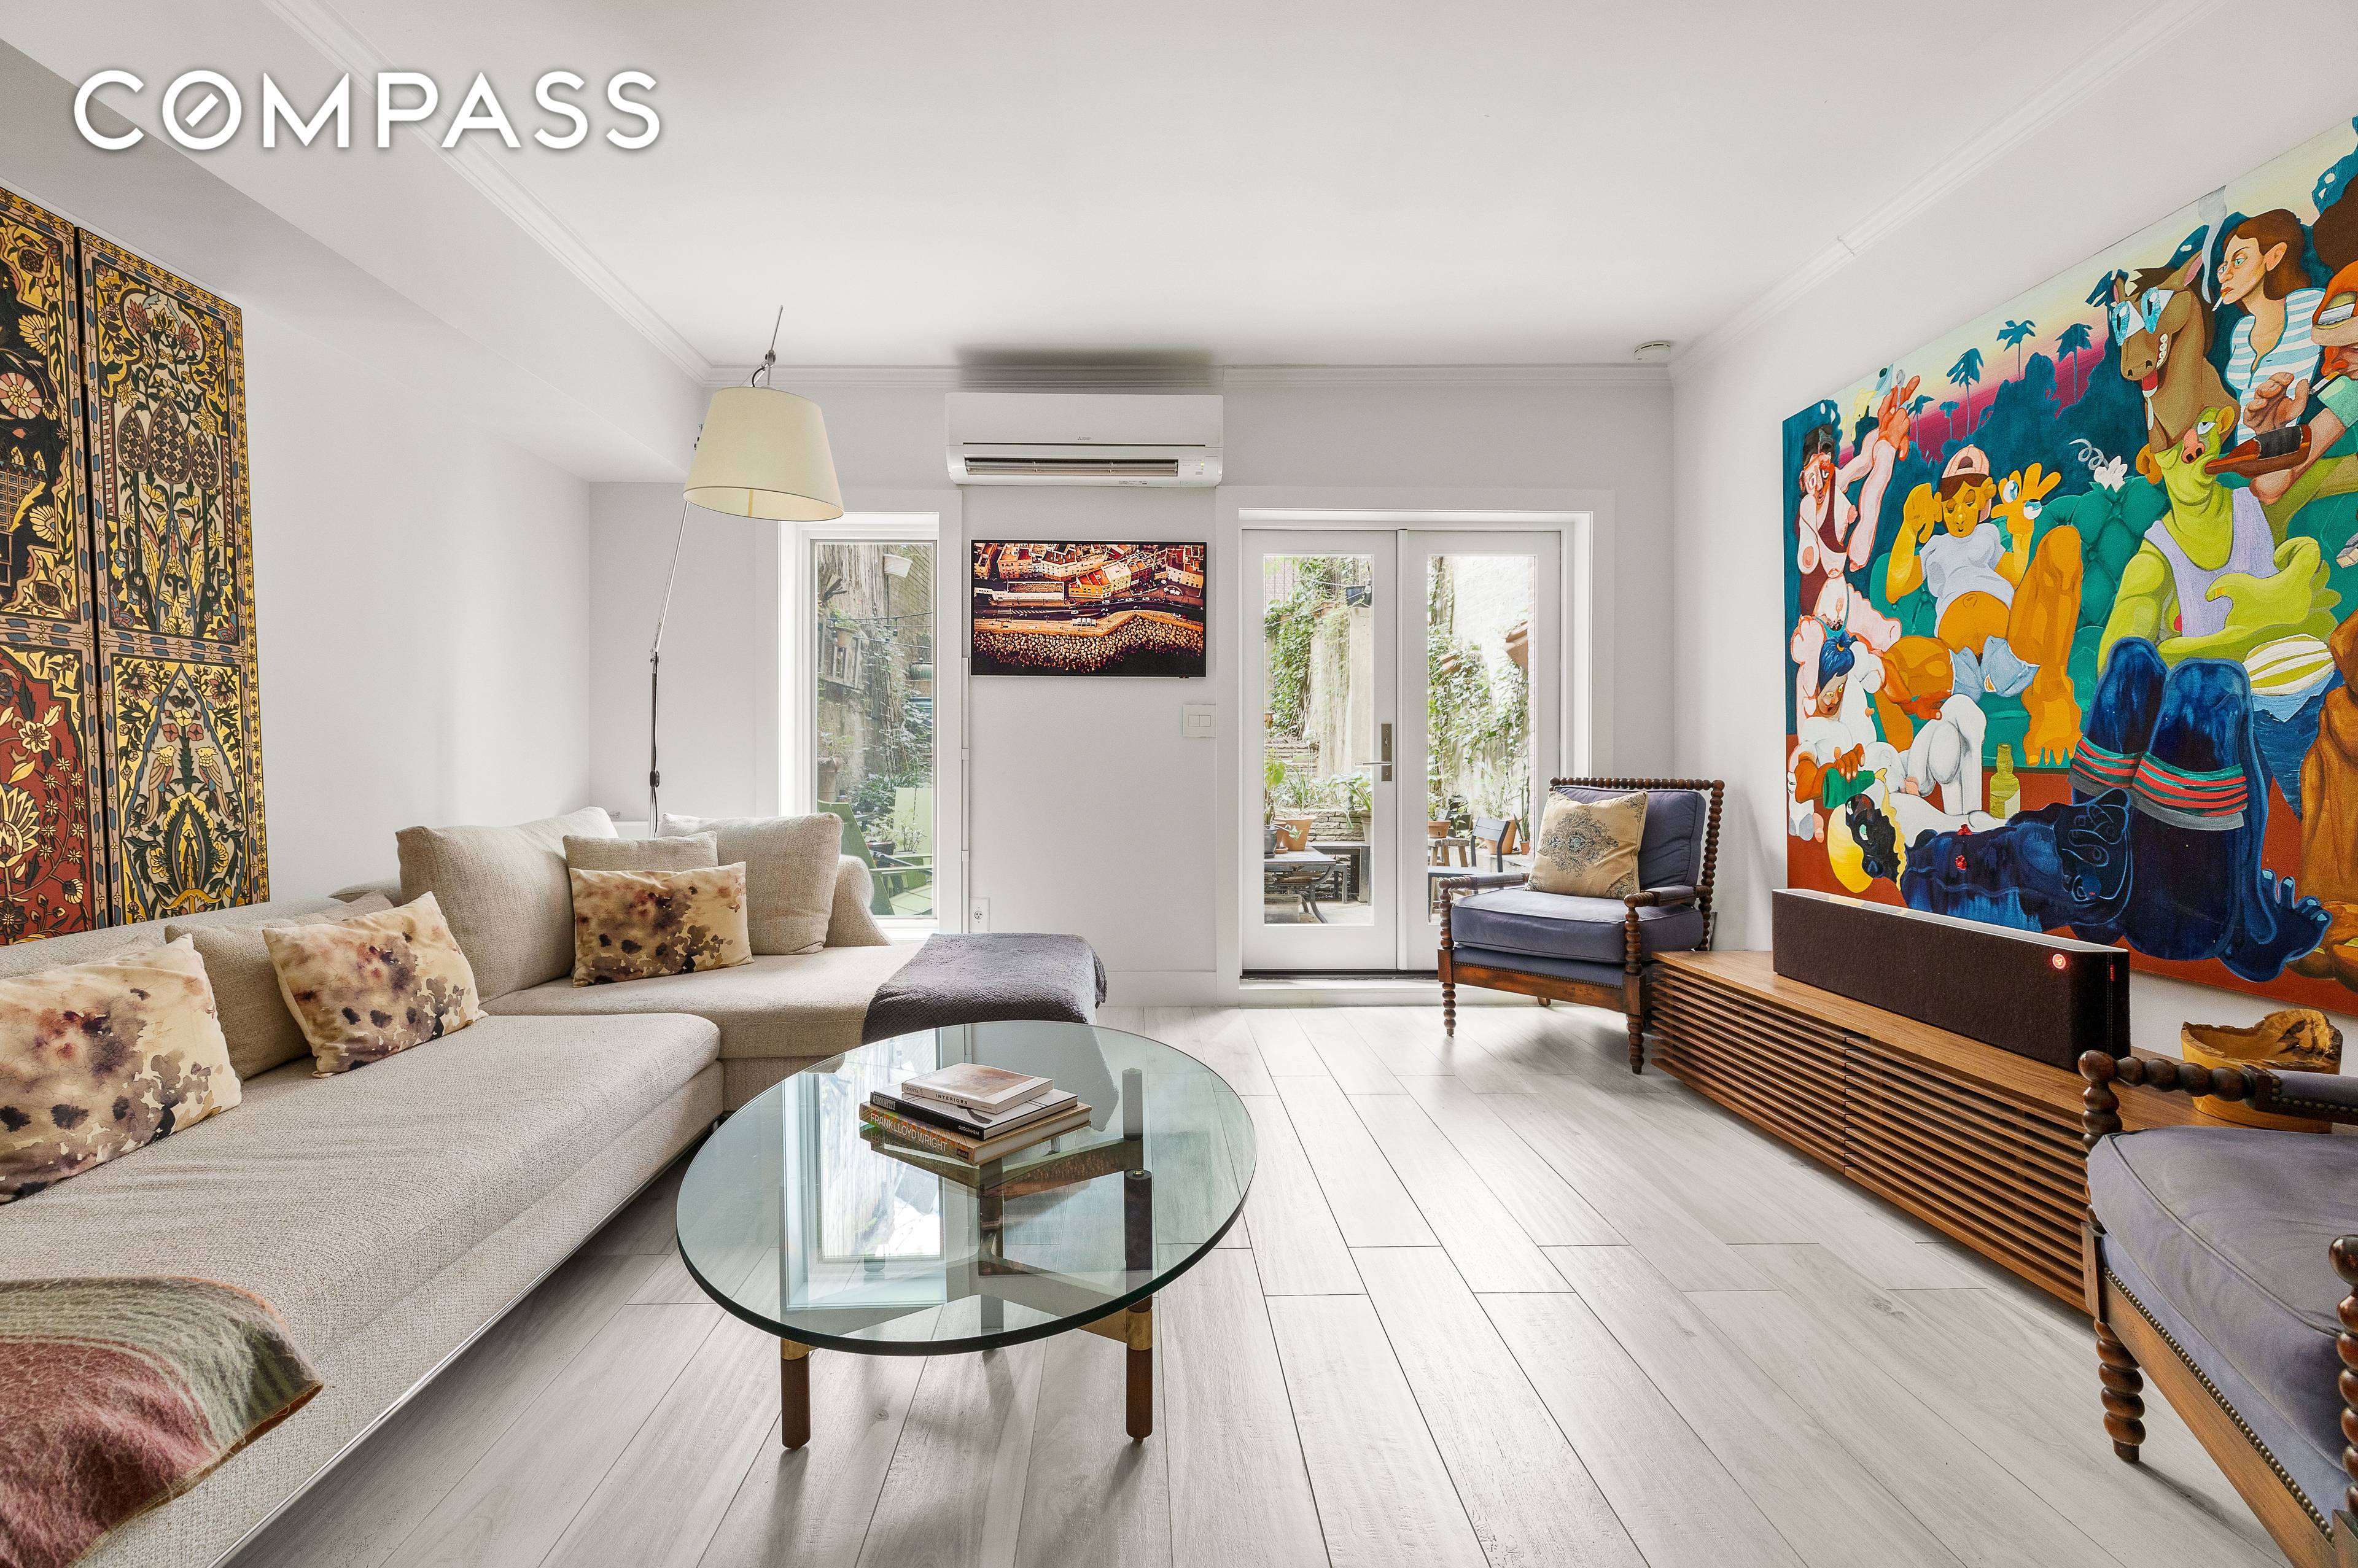 This exquisitely renovated 1 bedroom apartment with an open concept living space and expansive private garden truly has it all.